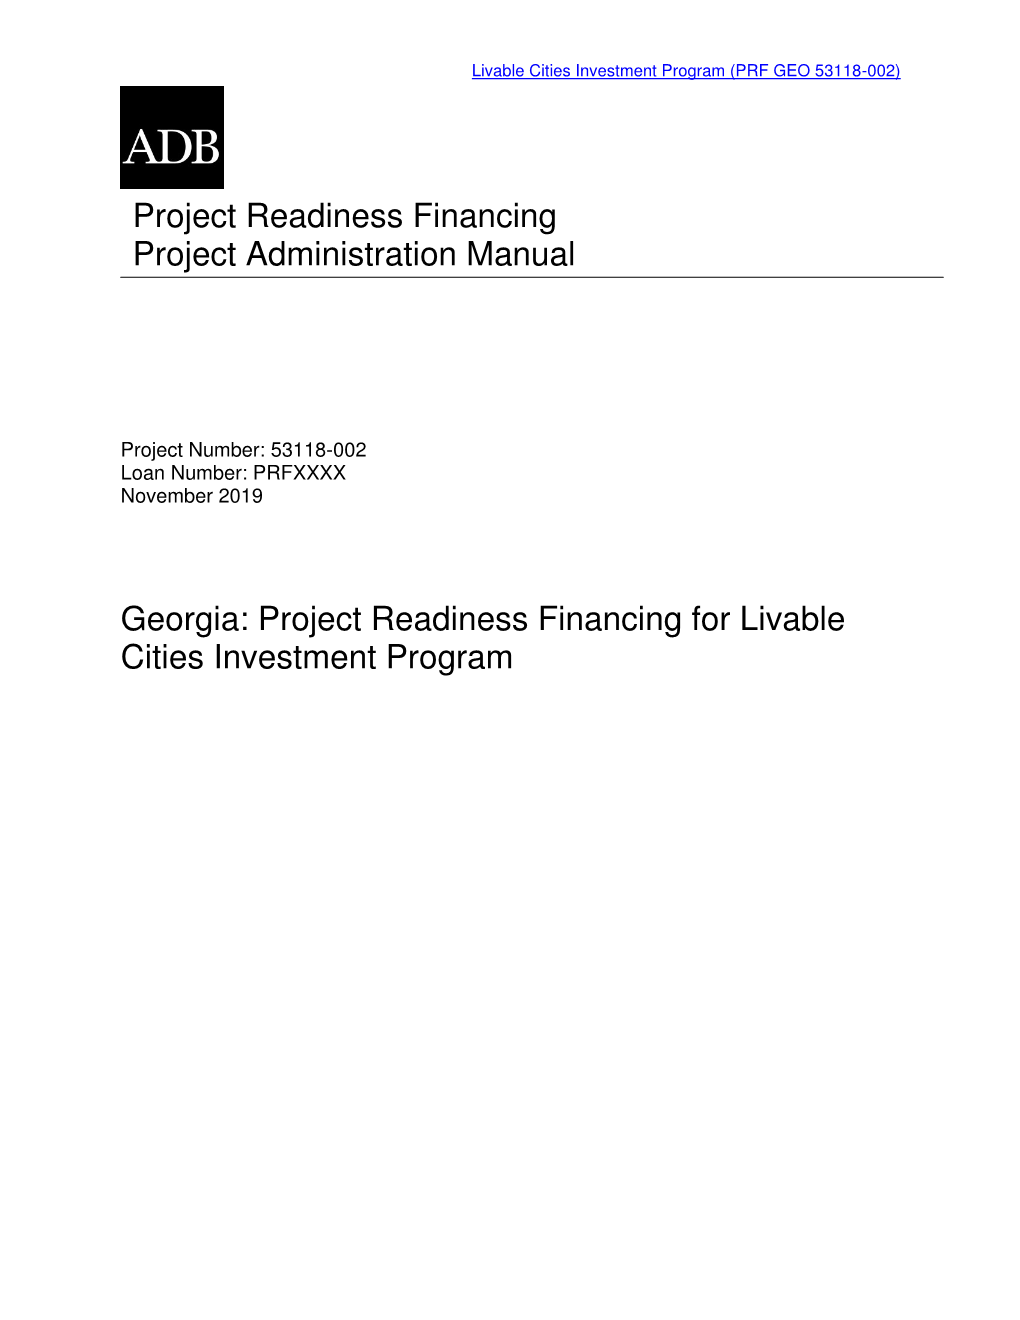 Project Readiness Financing: Project Administration Manual